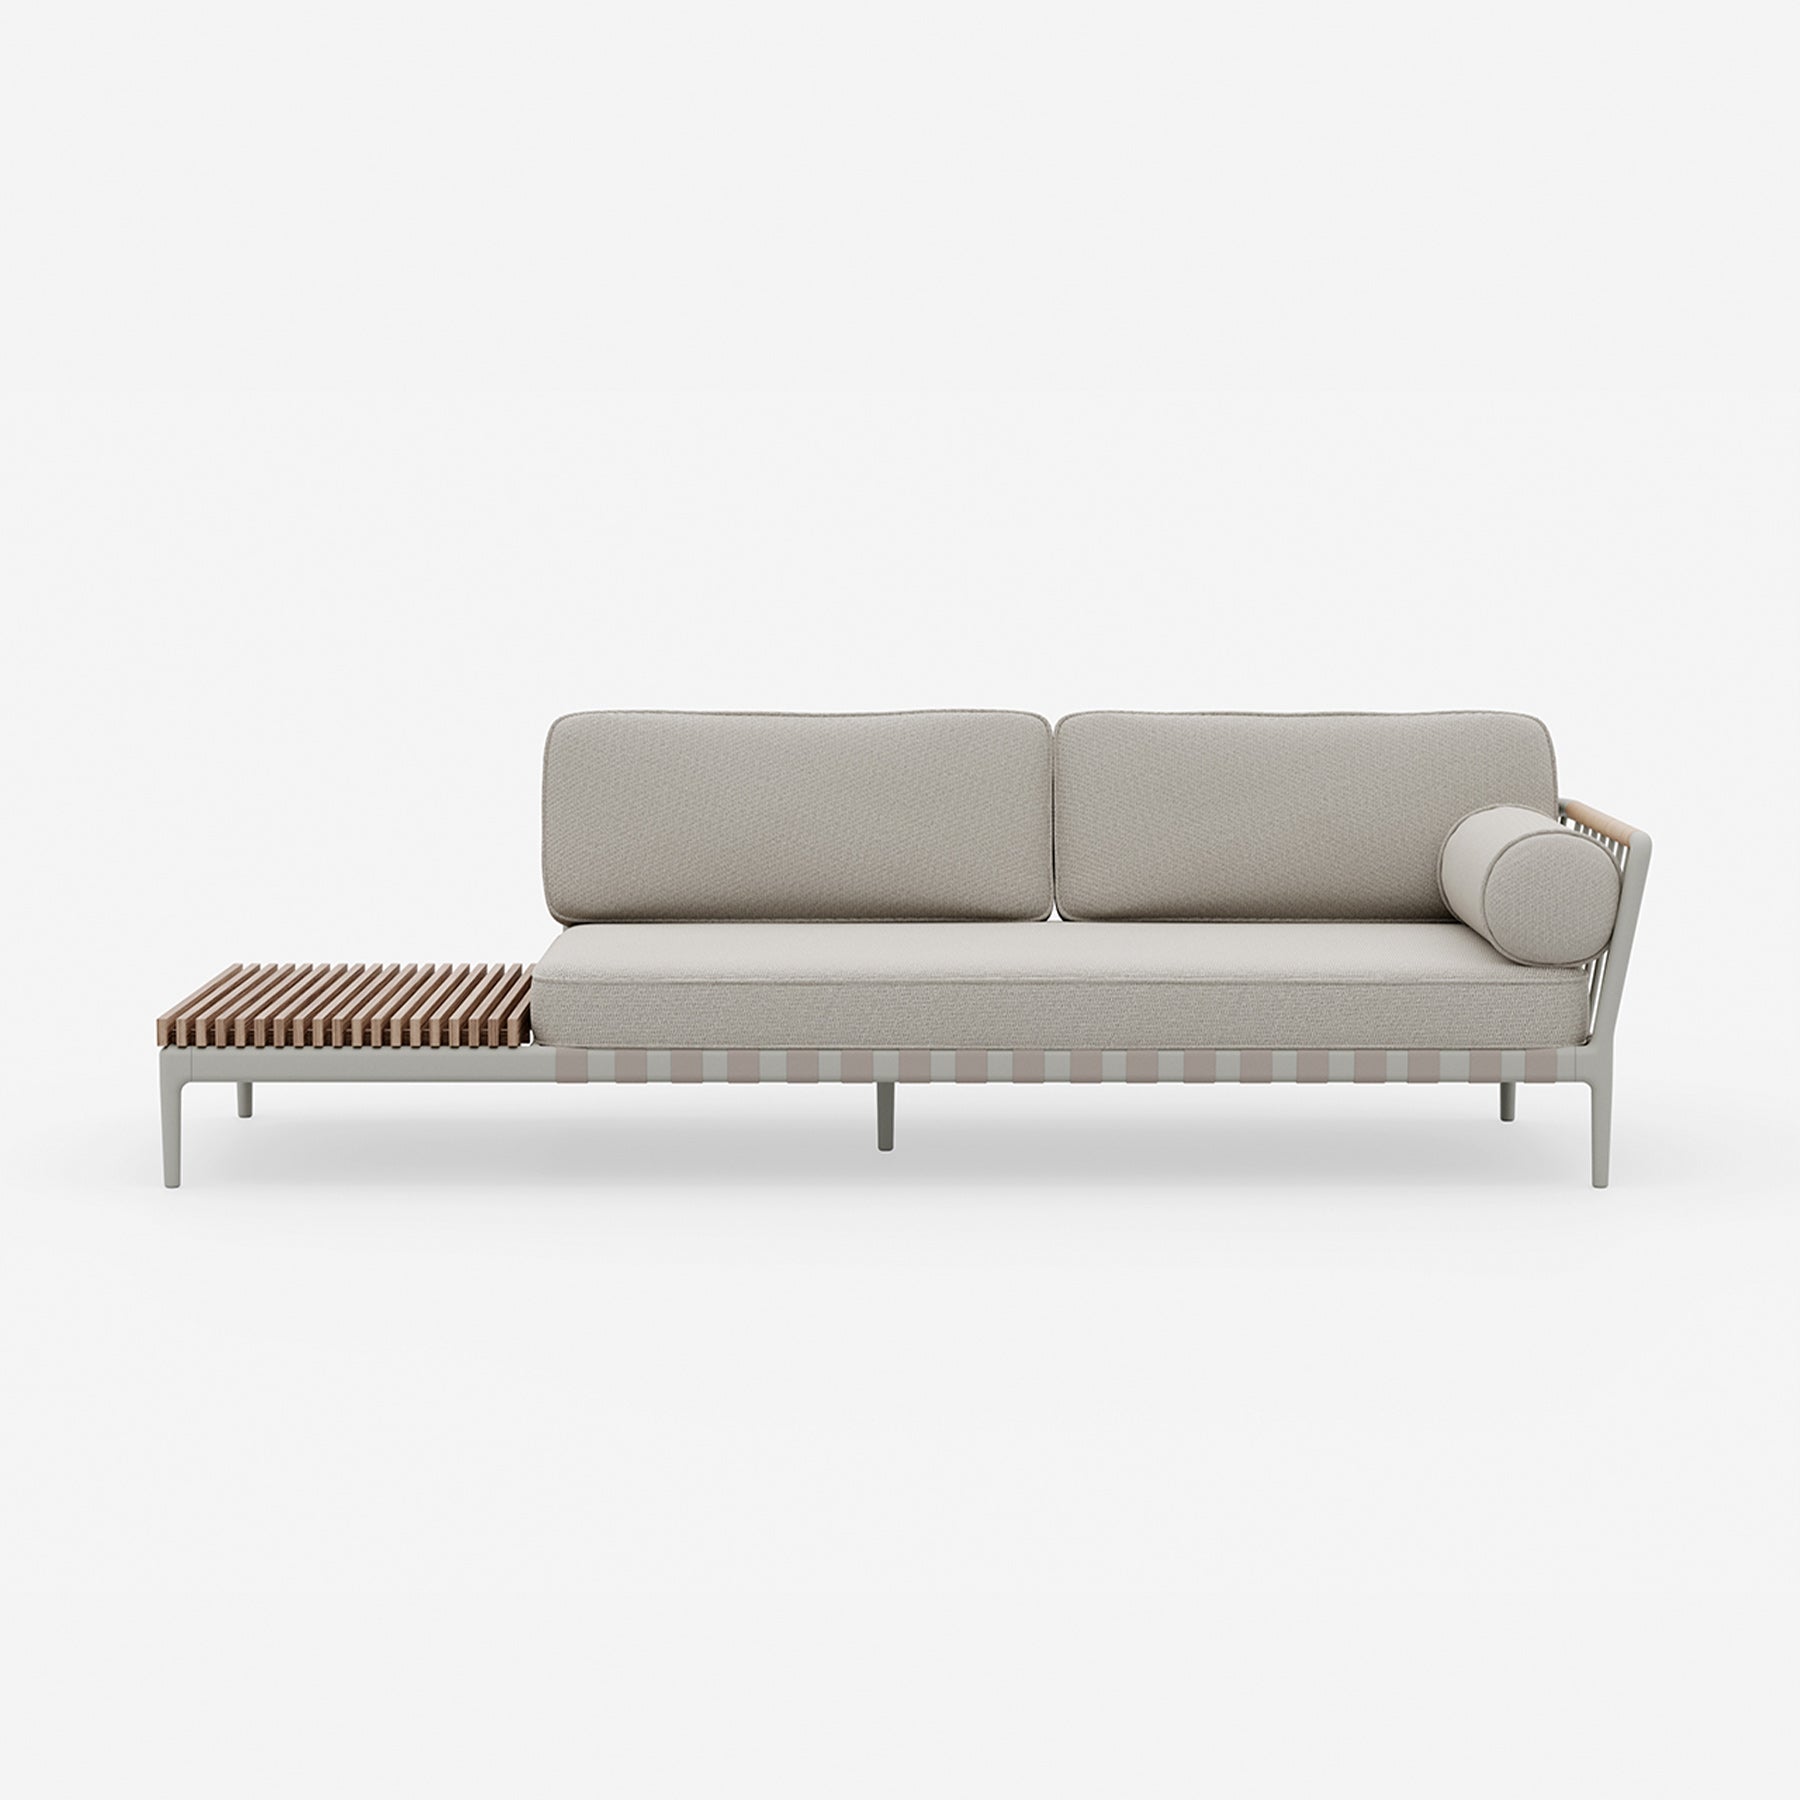 VIPP720 Open-Air sofa table end (left or right) - Moleta Munro Limited